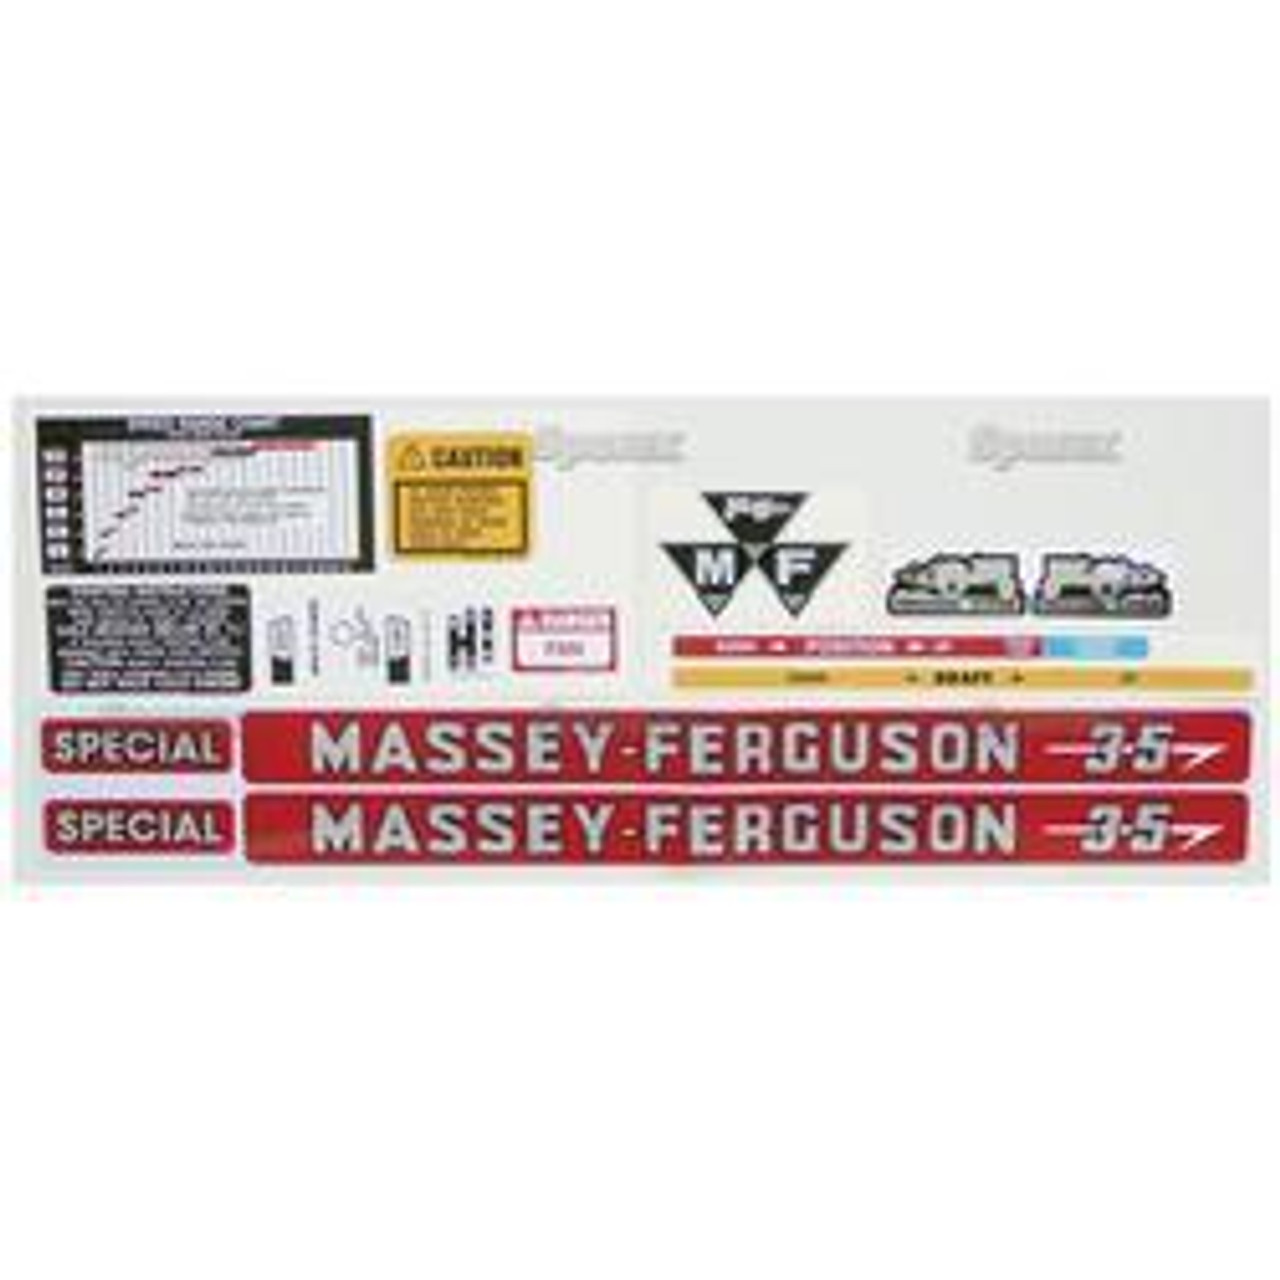 New Massey Ferguson 35 Special (Separate) Decal Set